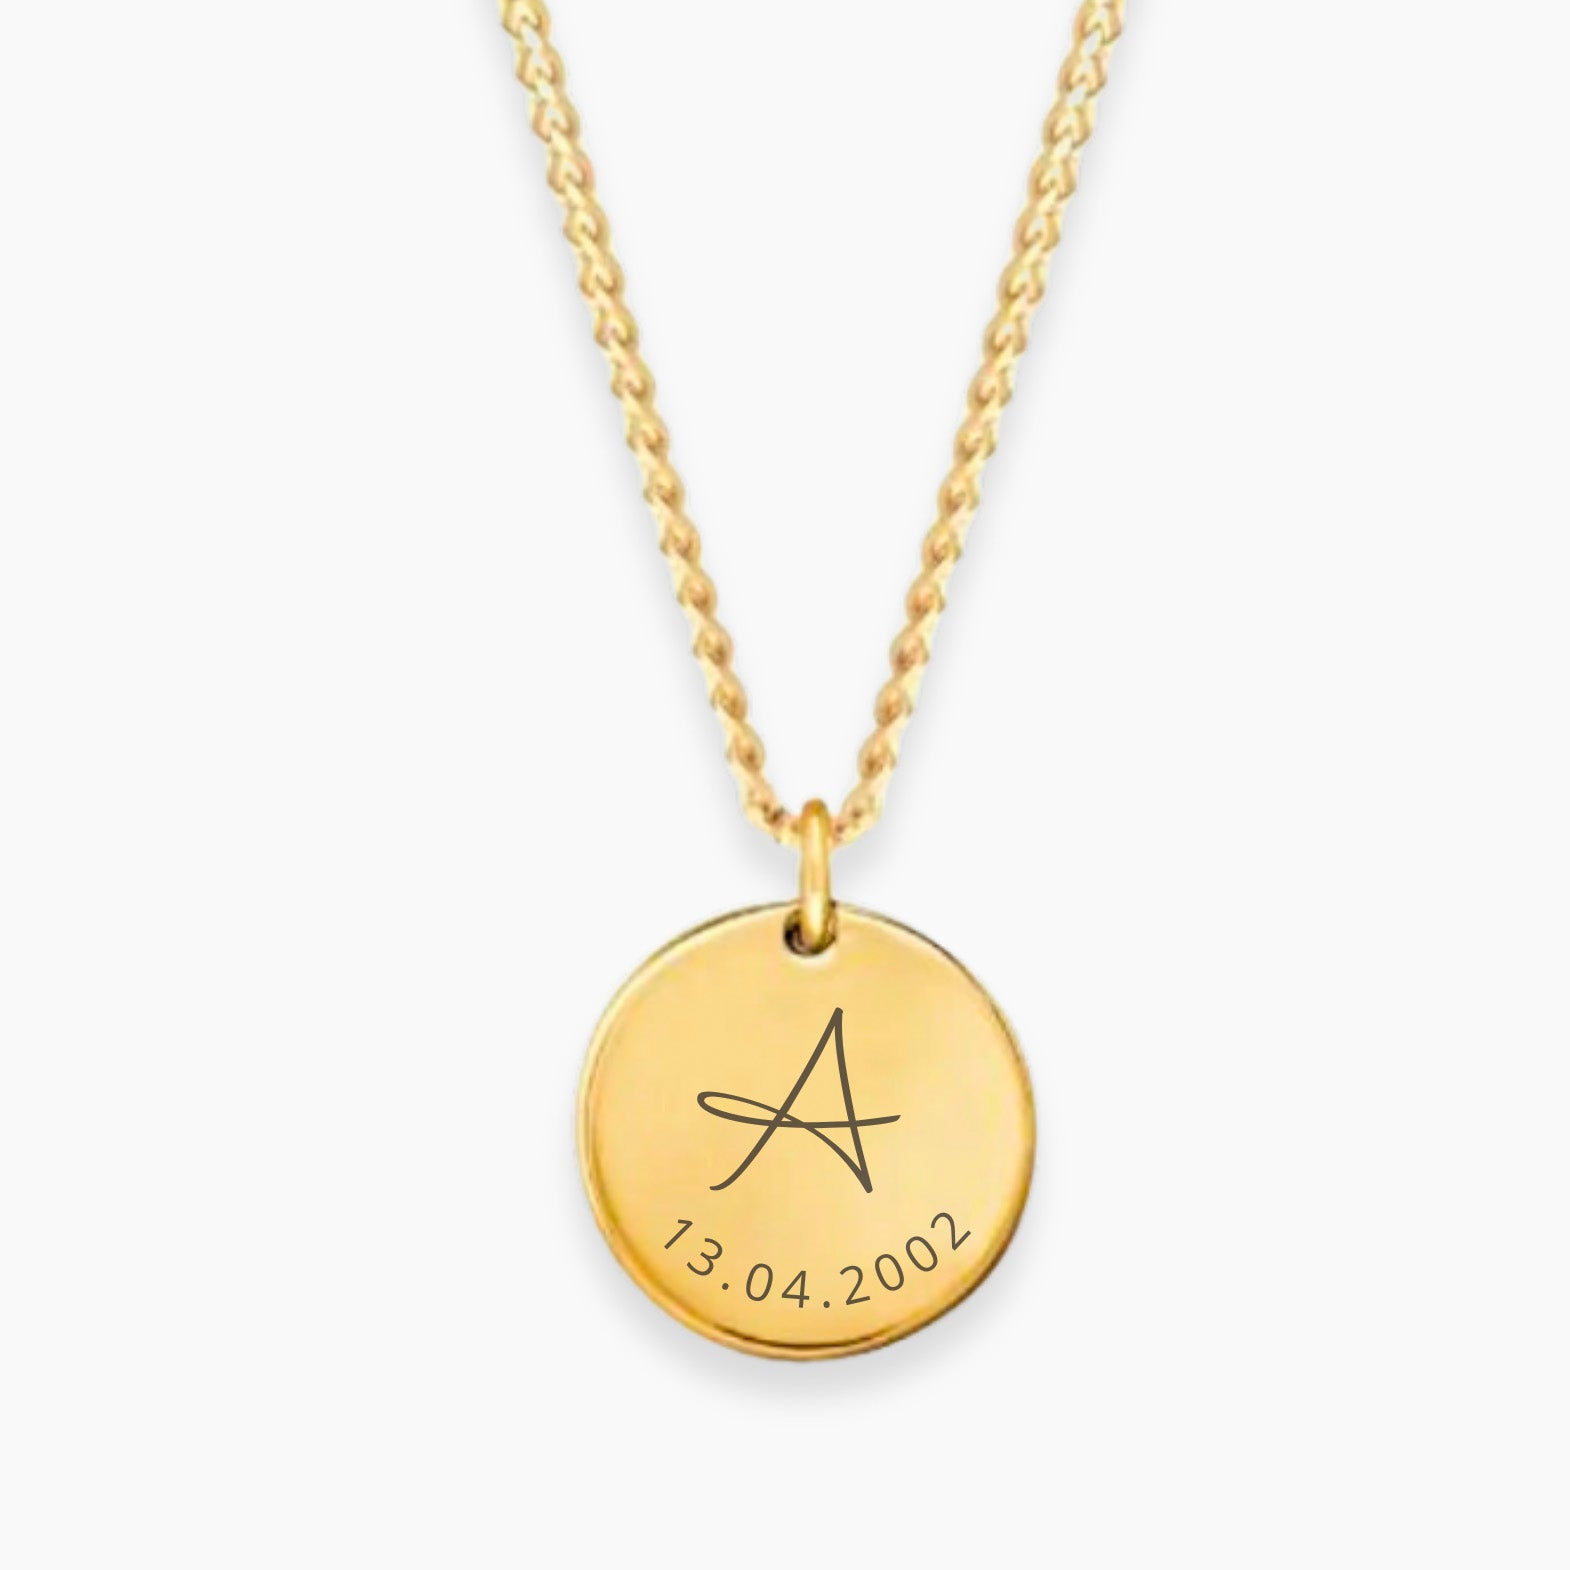 NIRO Personalized Necklace | Initials